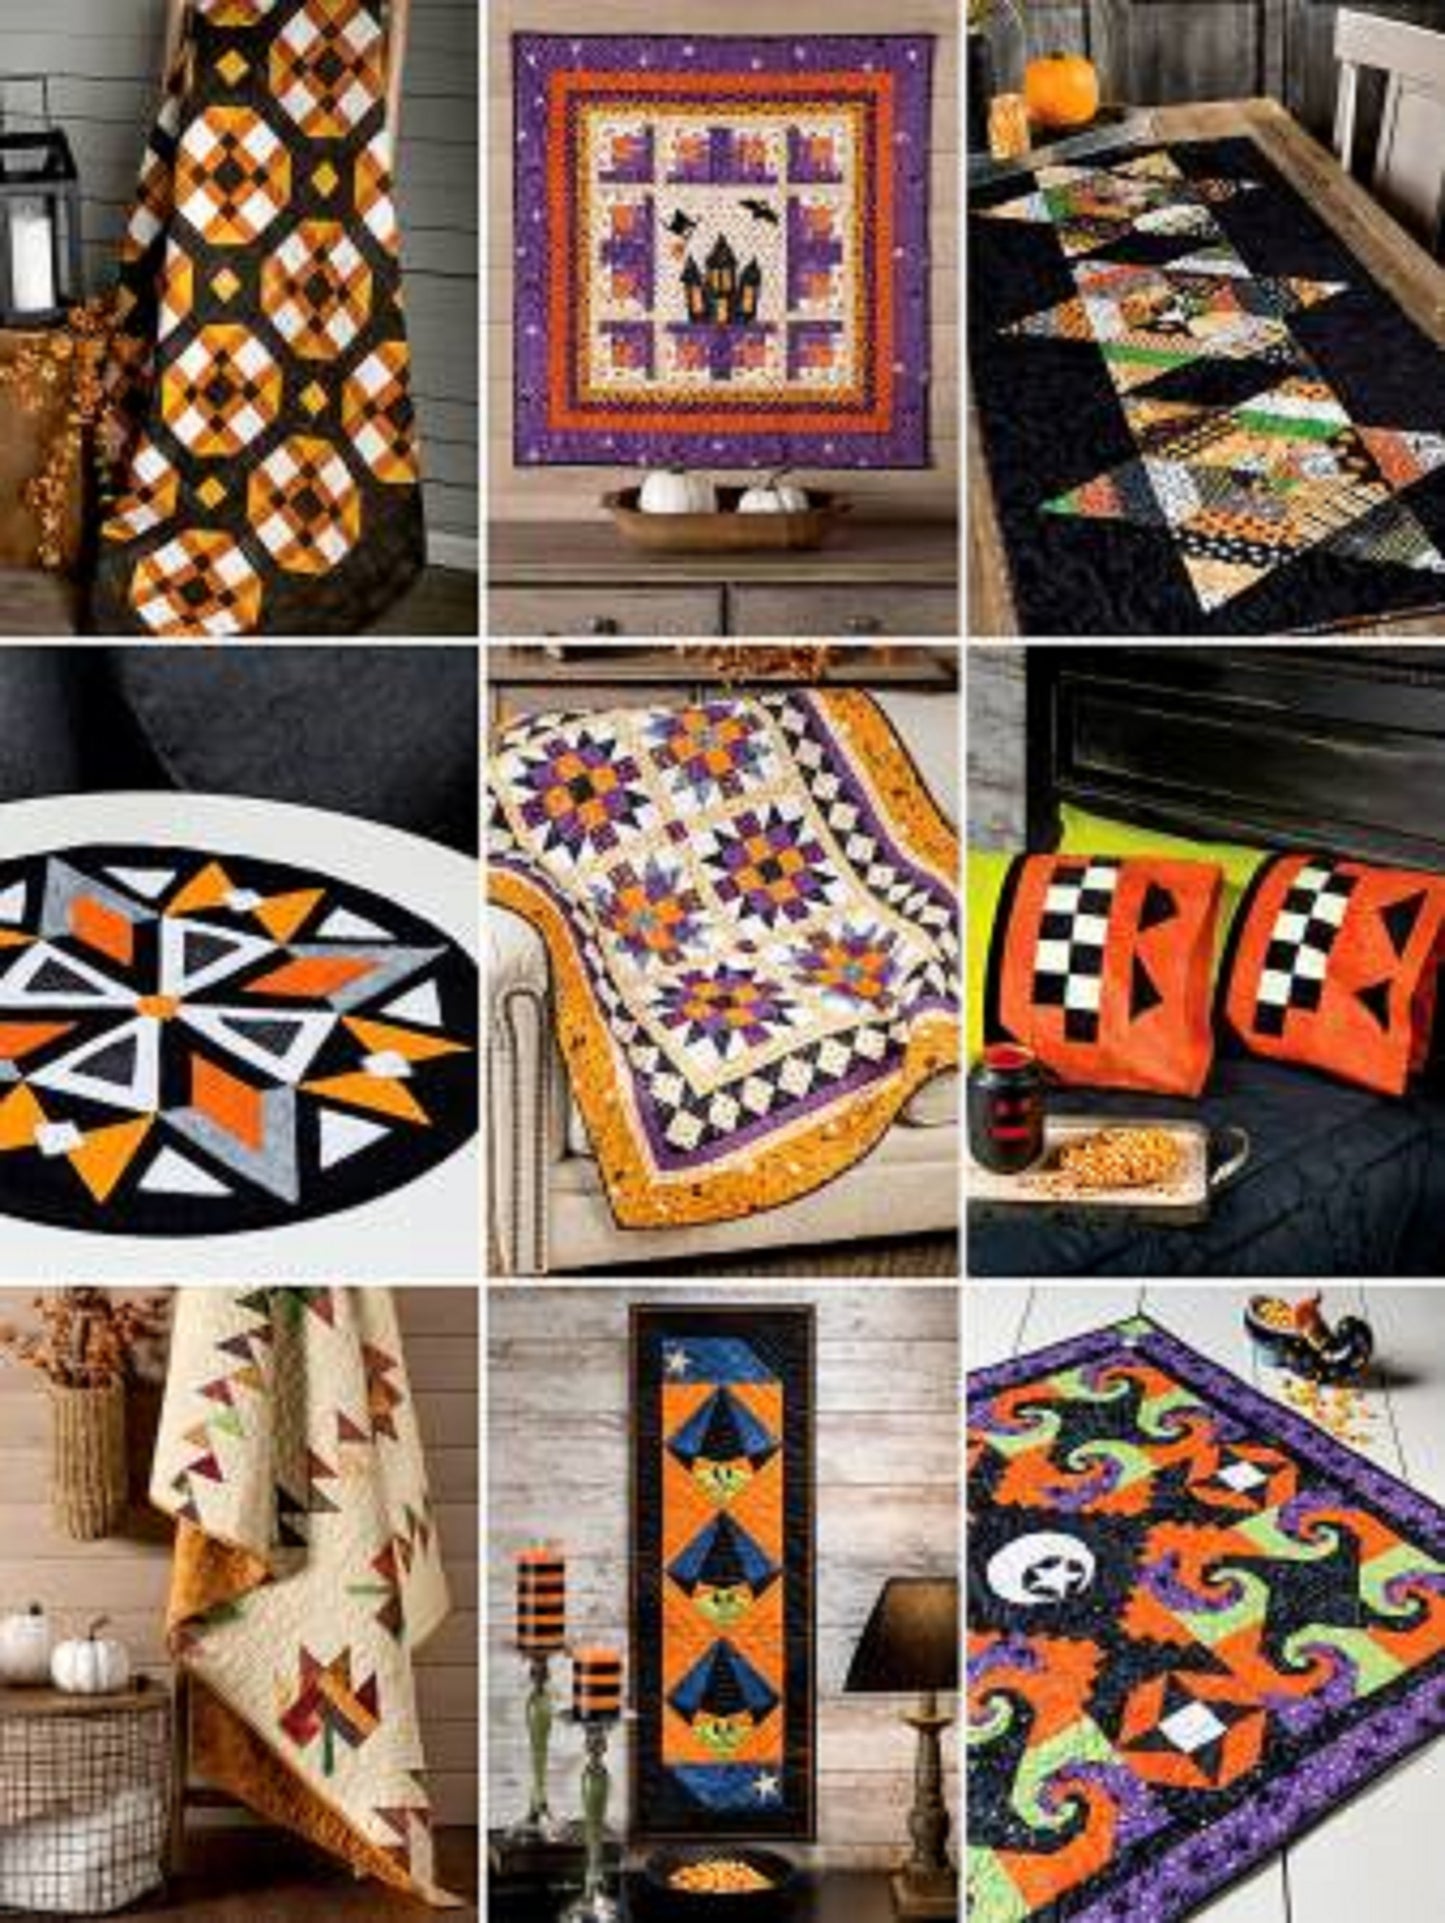 Spooktacular Halloween Quilting by Annie's Quilting